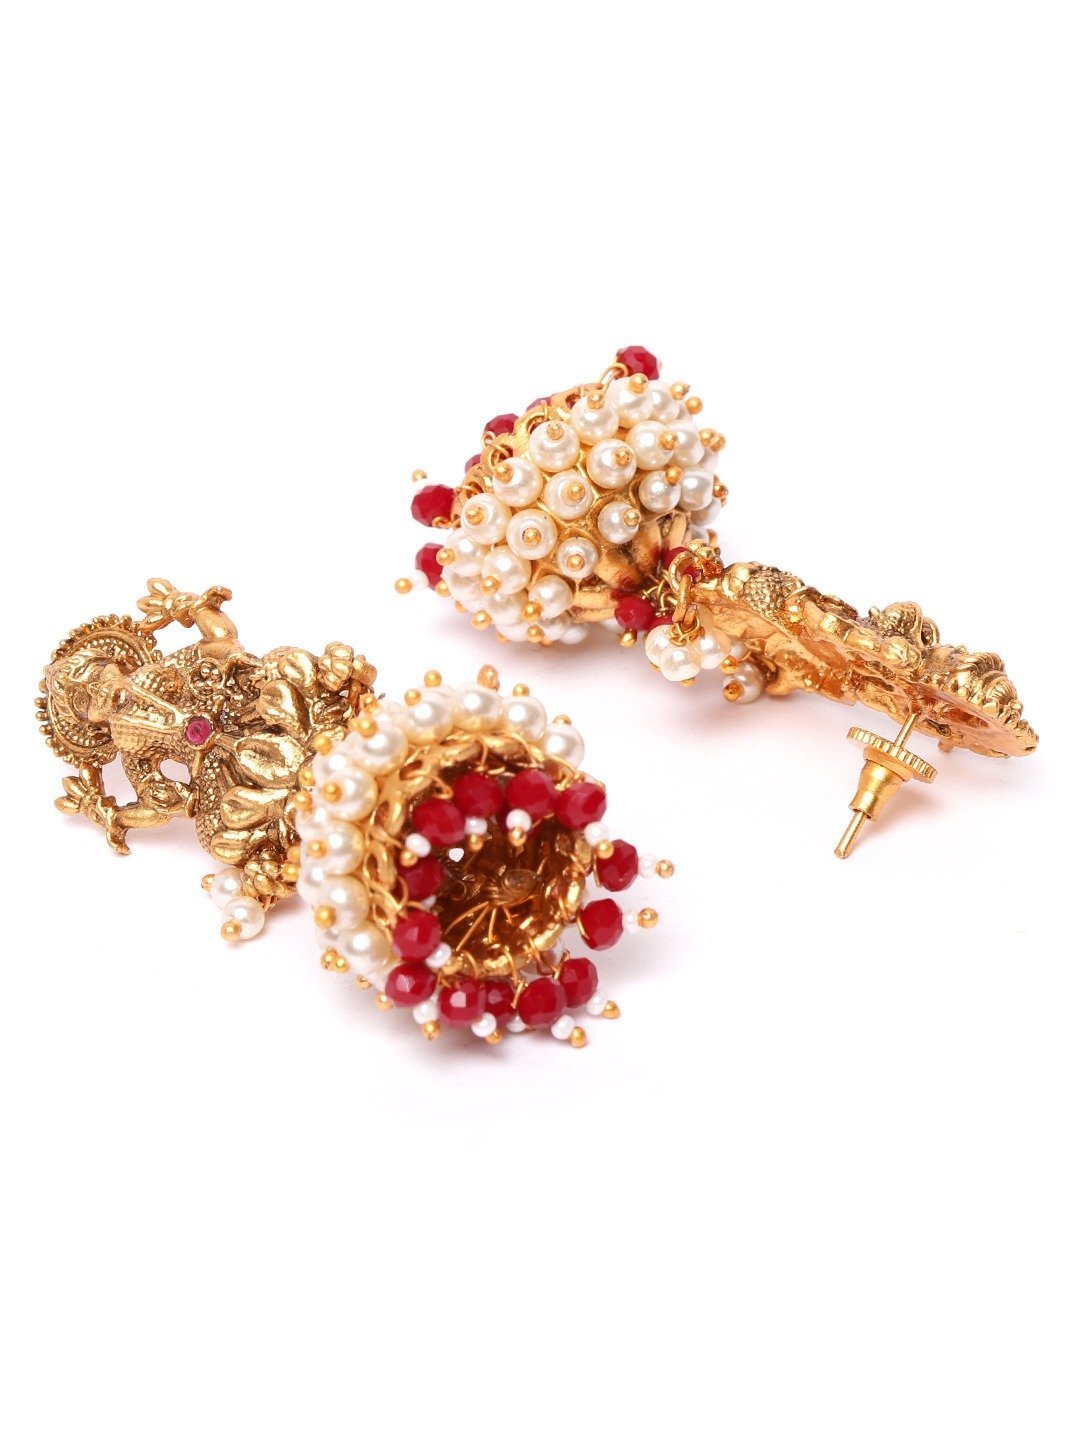 Women's Goddess Shaped and Beaded Gold Plated Earrings - Priyaasi